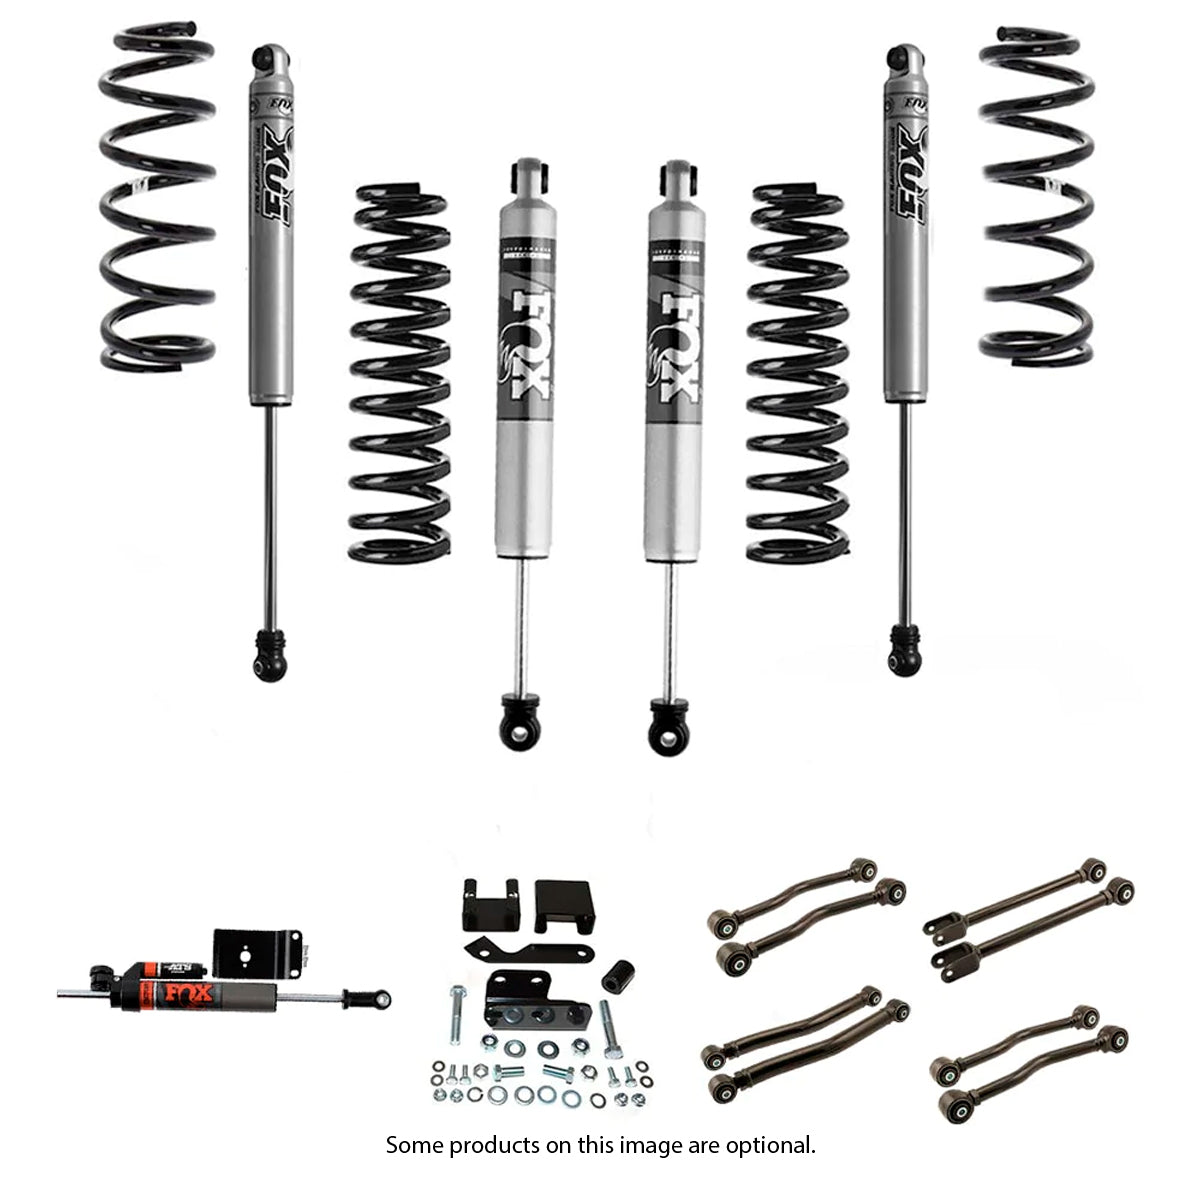 An enhanced Fox Racing suspension kit with springs for the Jeep Wrangler that provides control on and off-road.